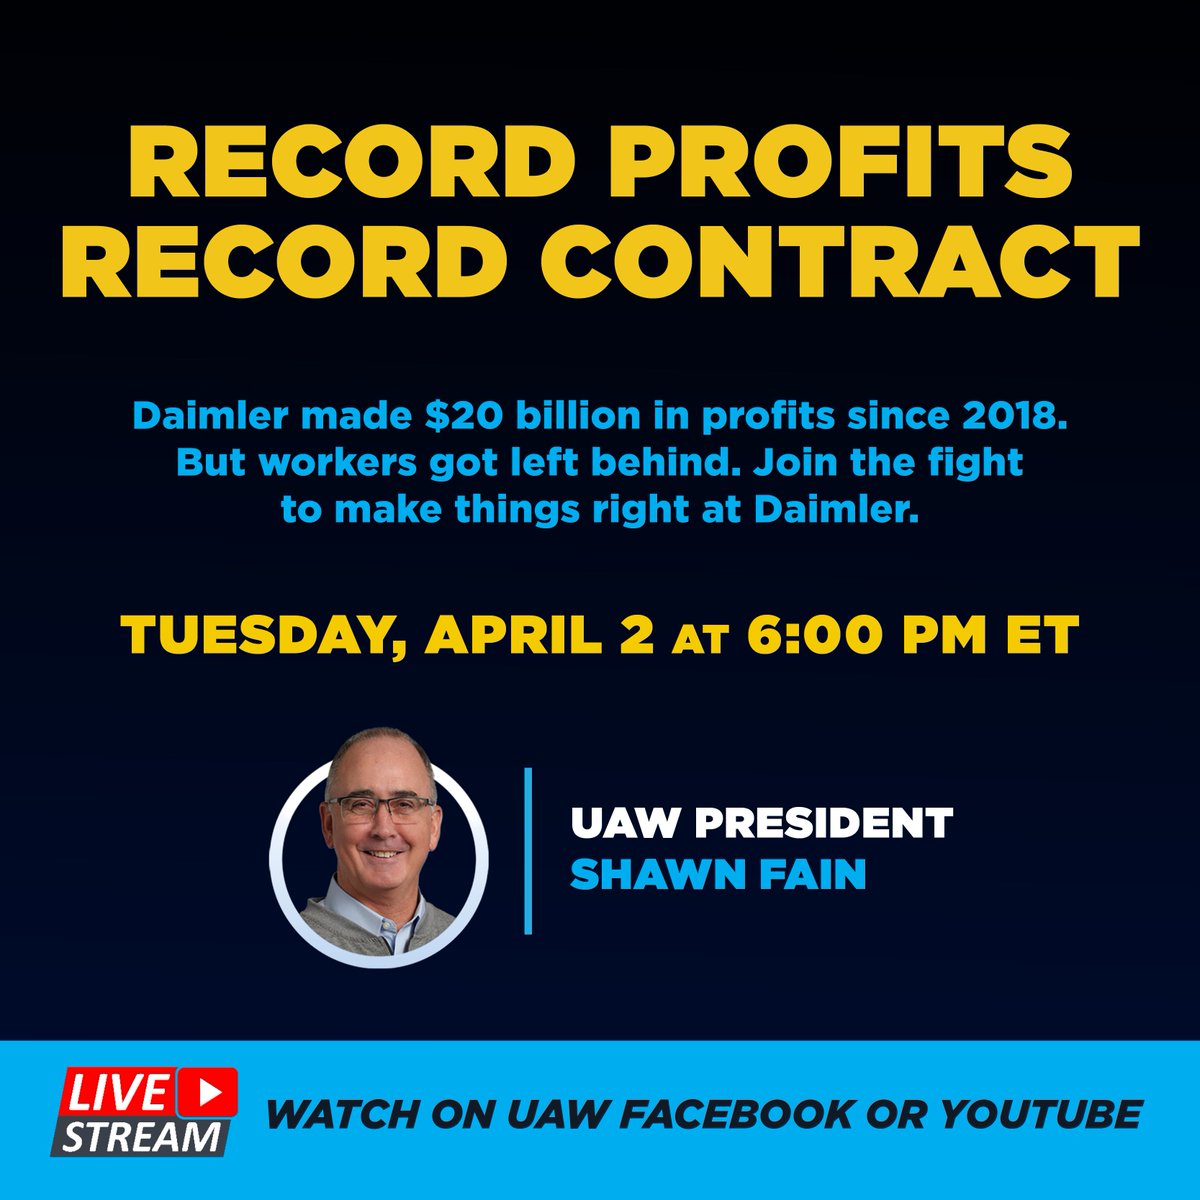 Starting soon! Join UAW President Shawn Fain at 6 pm ET on Facebook Live to stand with workers at Daimler Truck. #StandUpDaimler #StandUpUAW